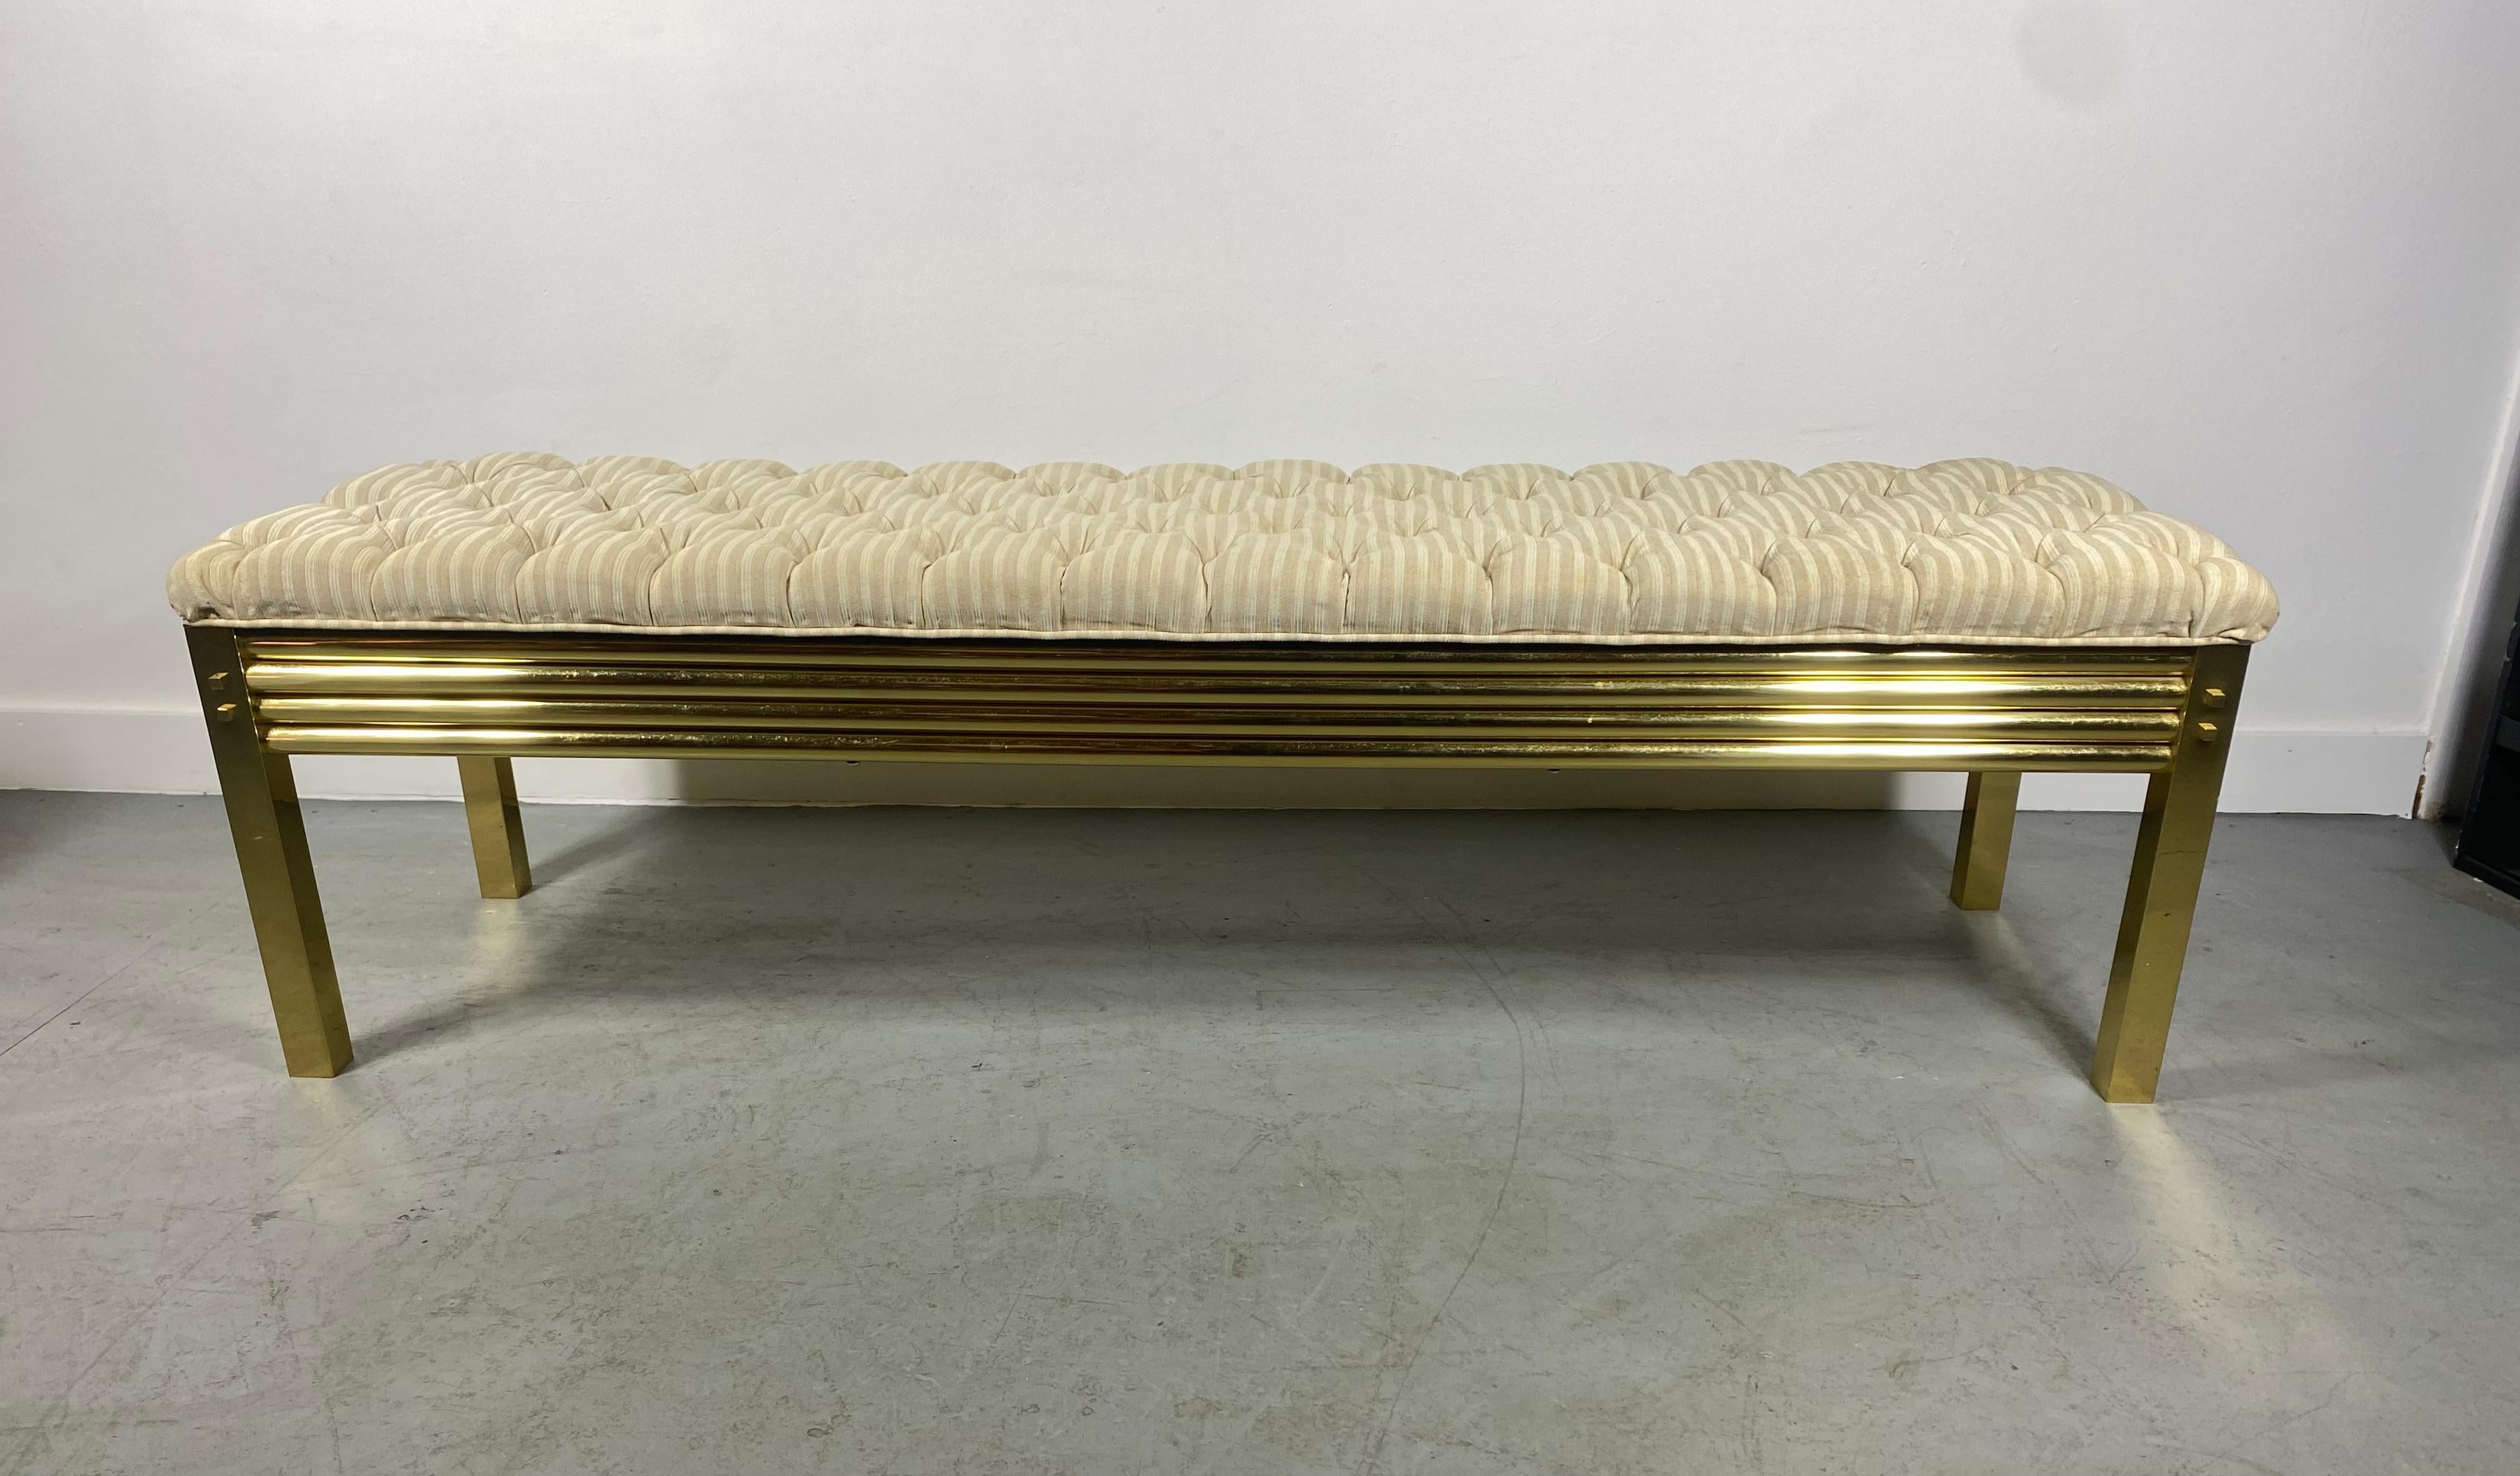 Stunning brass and tufted top bench, manner of Karl Springer, Pierre Cardin. Simple, elegant design. Fit seamlessly into any Modernist, Contemporary, Antique environment. superior quality and construction. Retains original fabric. Hand delivery